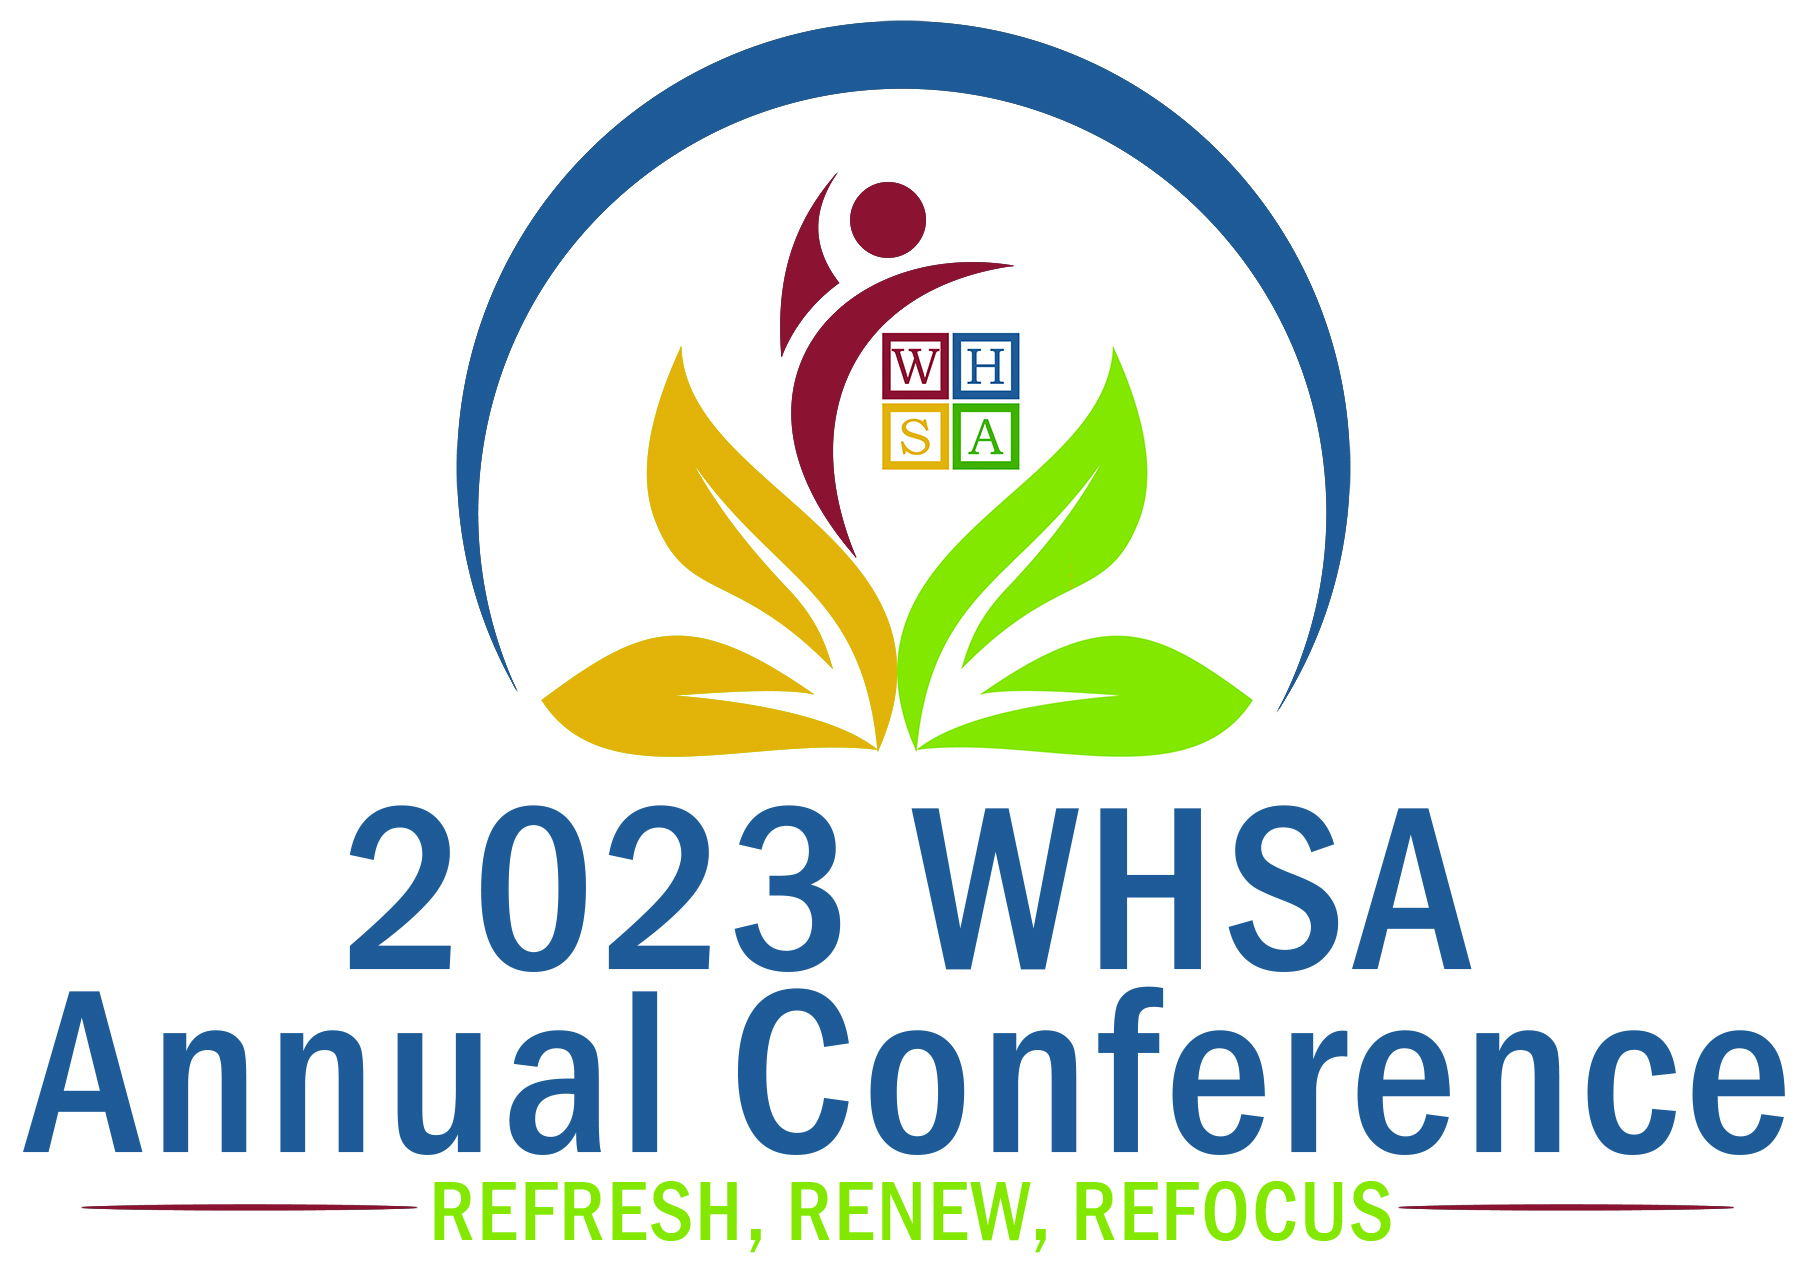 WHSA 2023 Annual Conference - Head Start Wisconsin